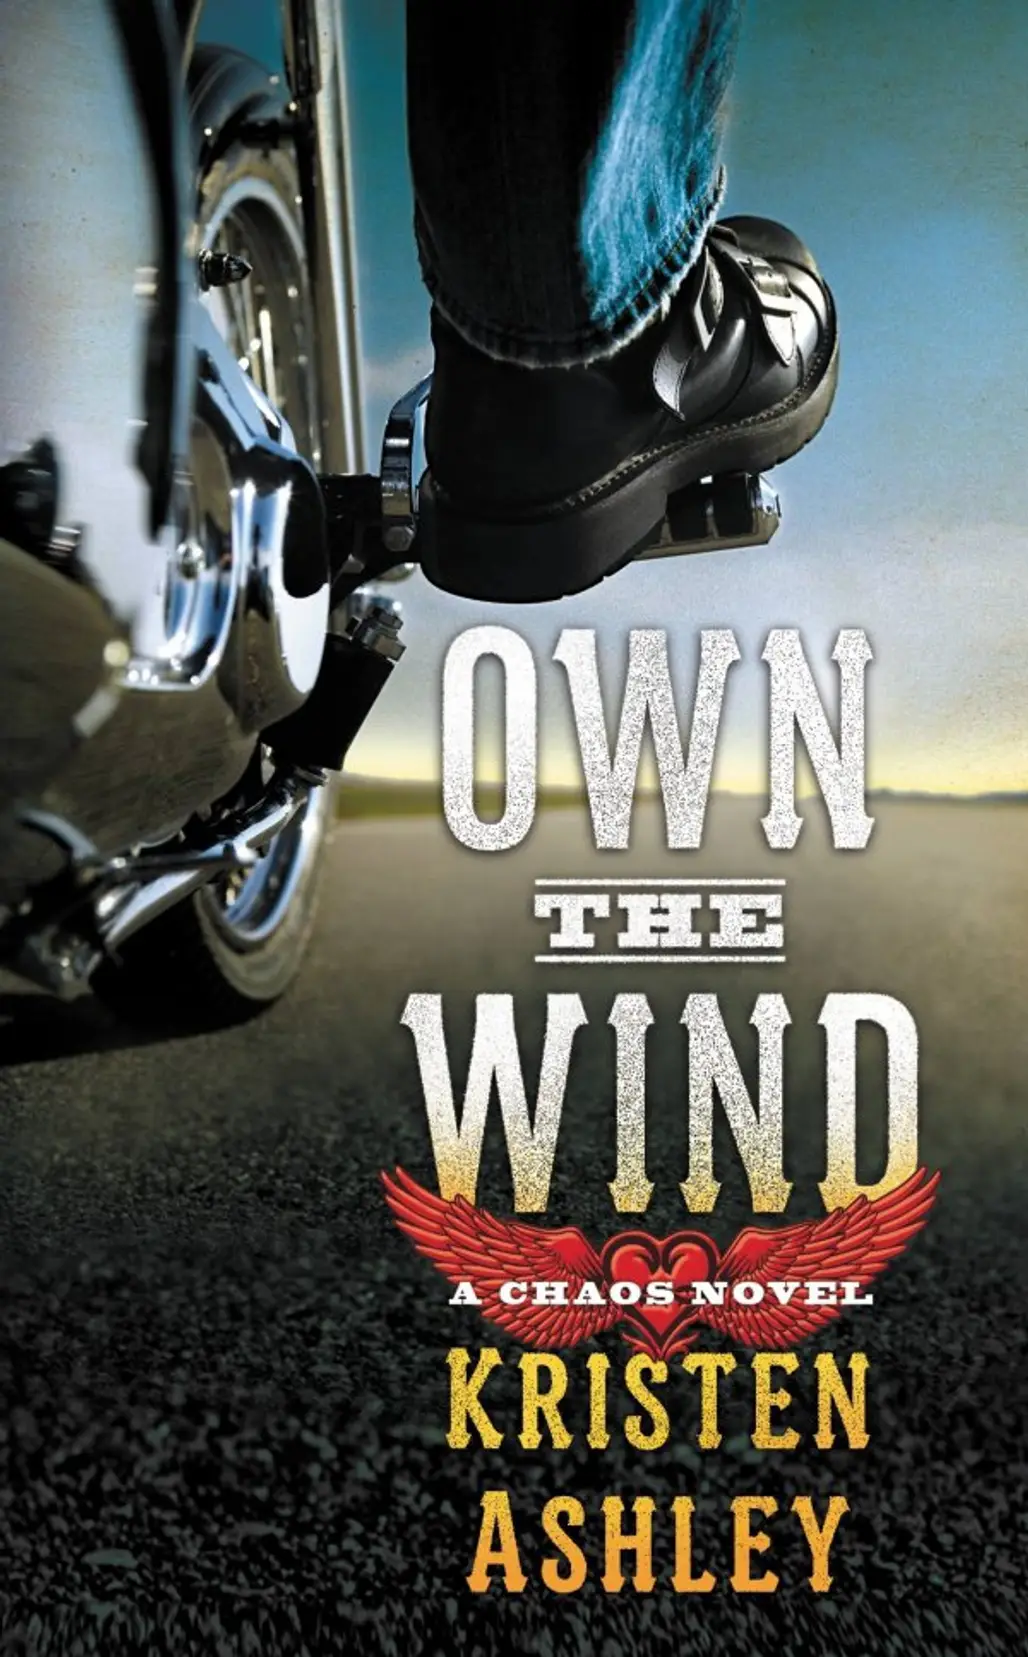 Own the Wind: a Chaos Novel by Kristen Ashley